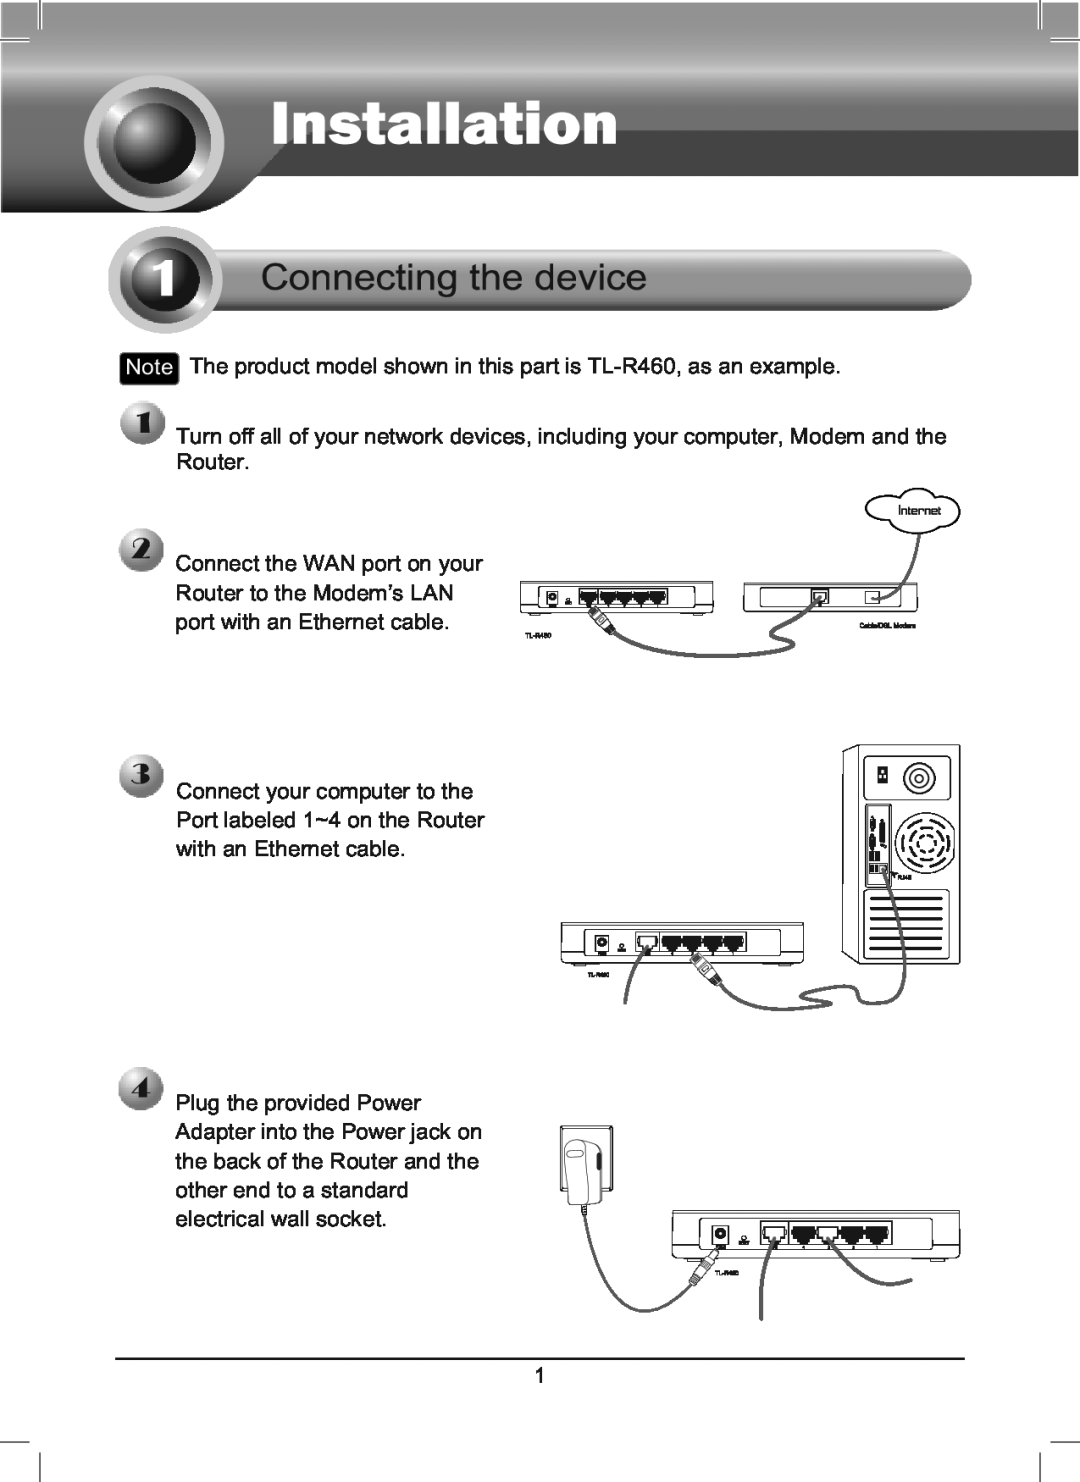 TP-Link manual Note The product model shown in this part is TL-R460, as an example 